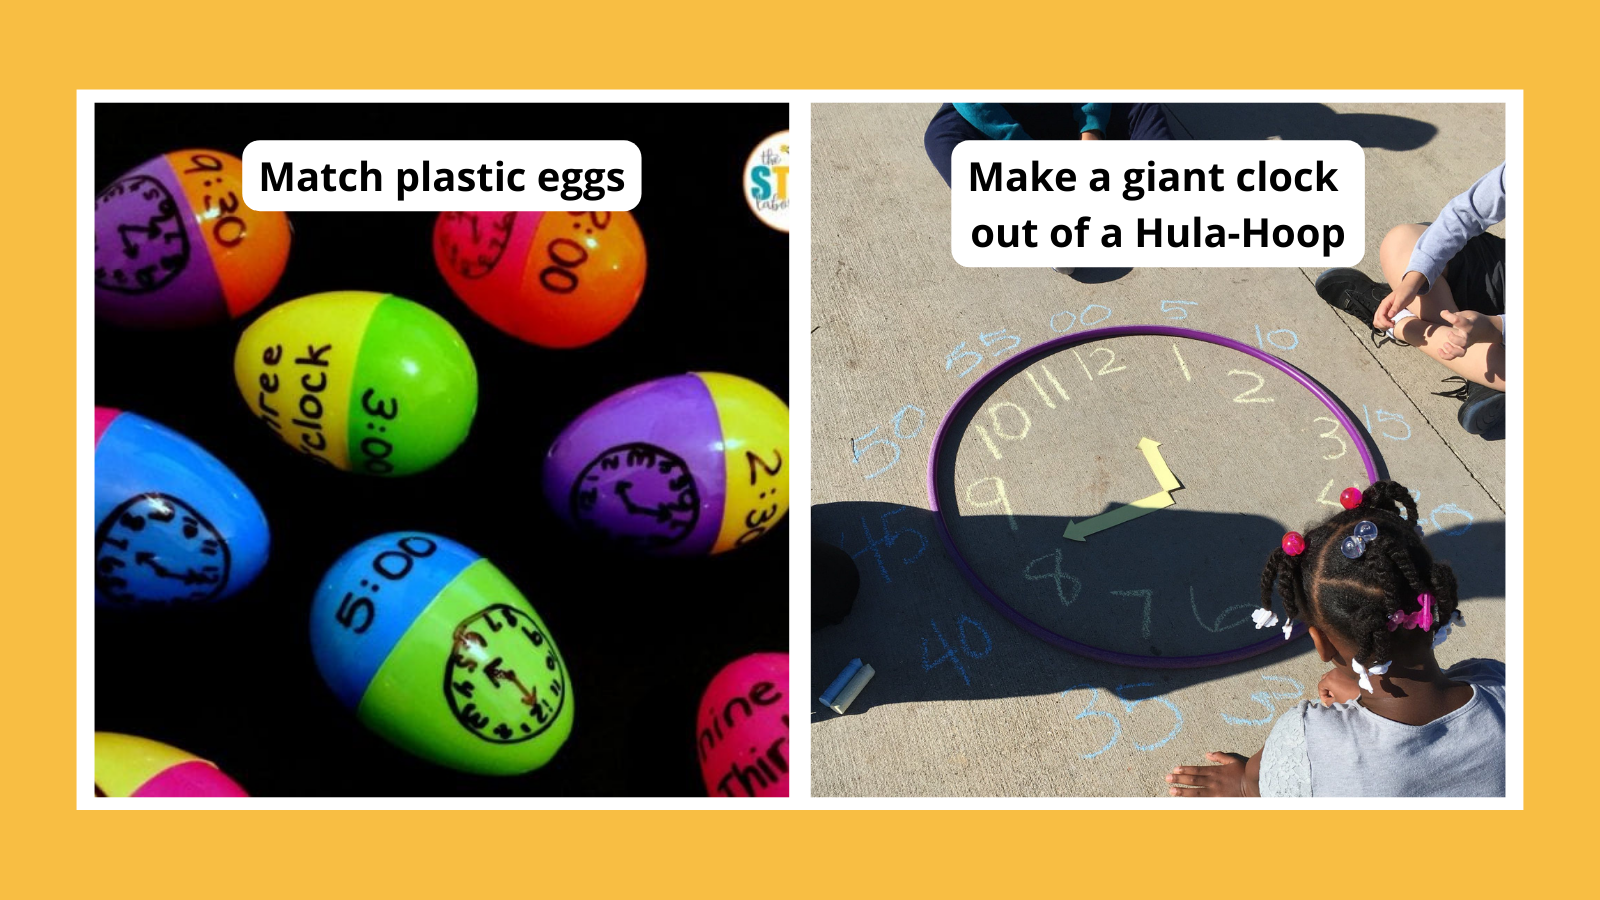 Examples of telling time games and activities including matching digital and analog times on halves of plastic Easter eggs and making a huge clock with a Hula-Hoop and chalk.